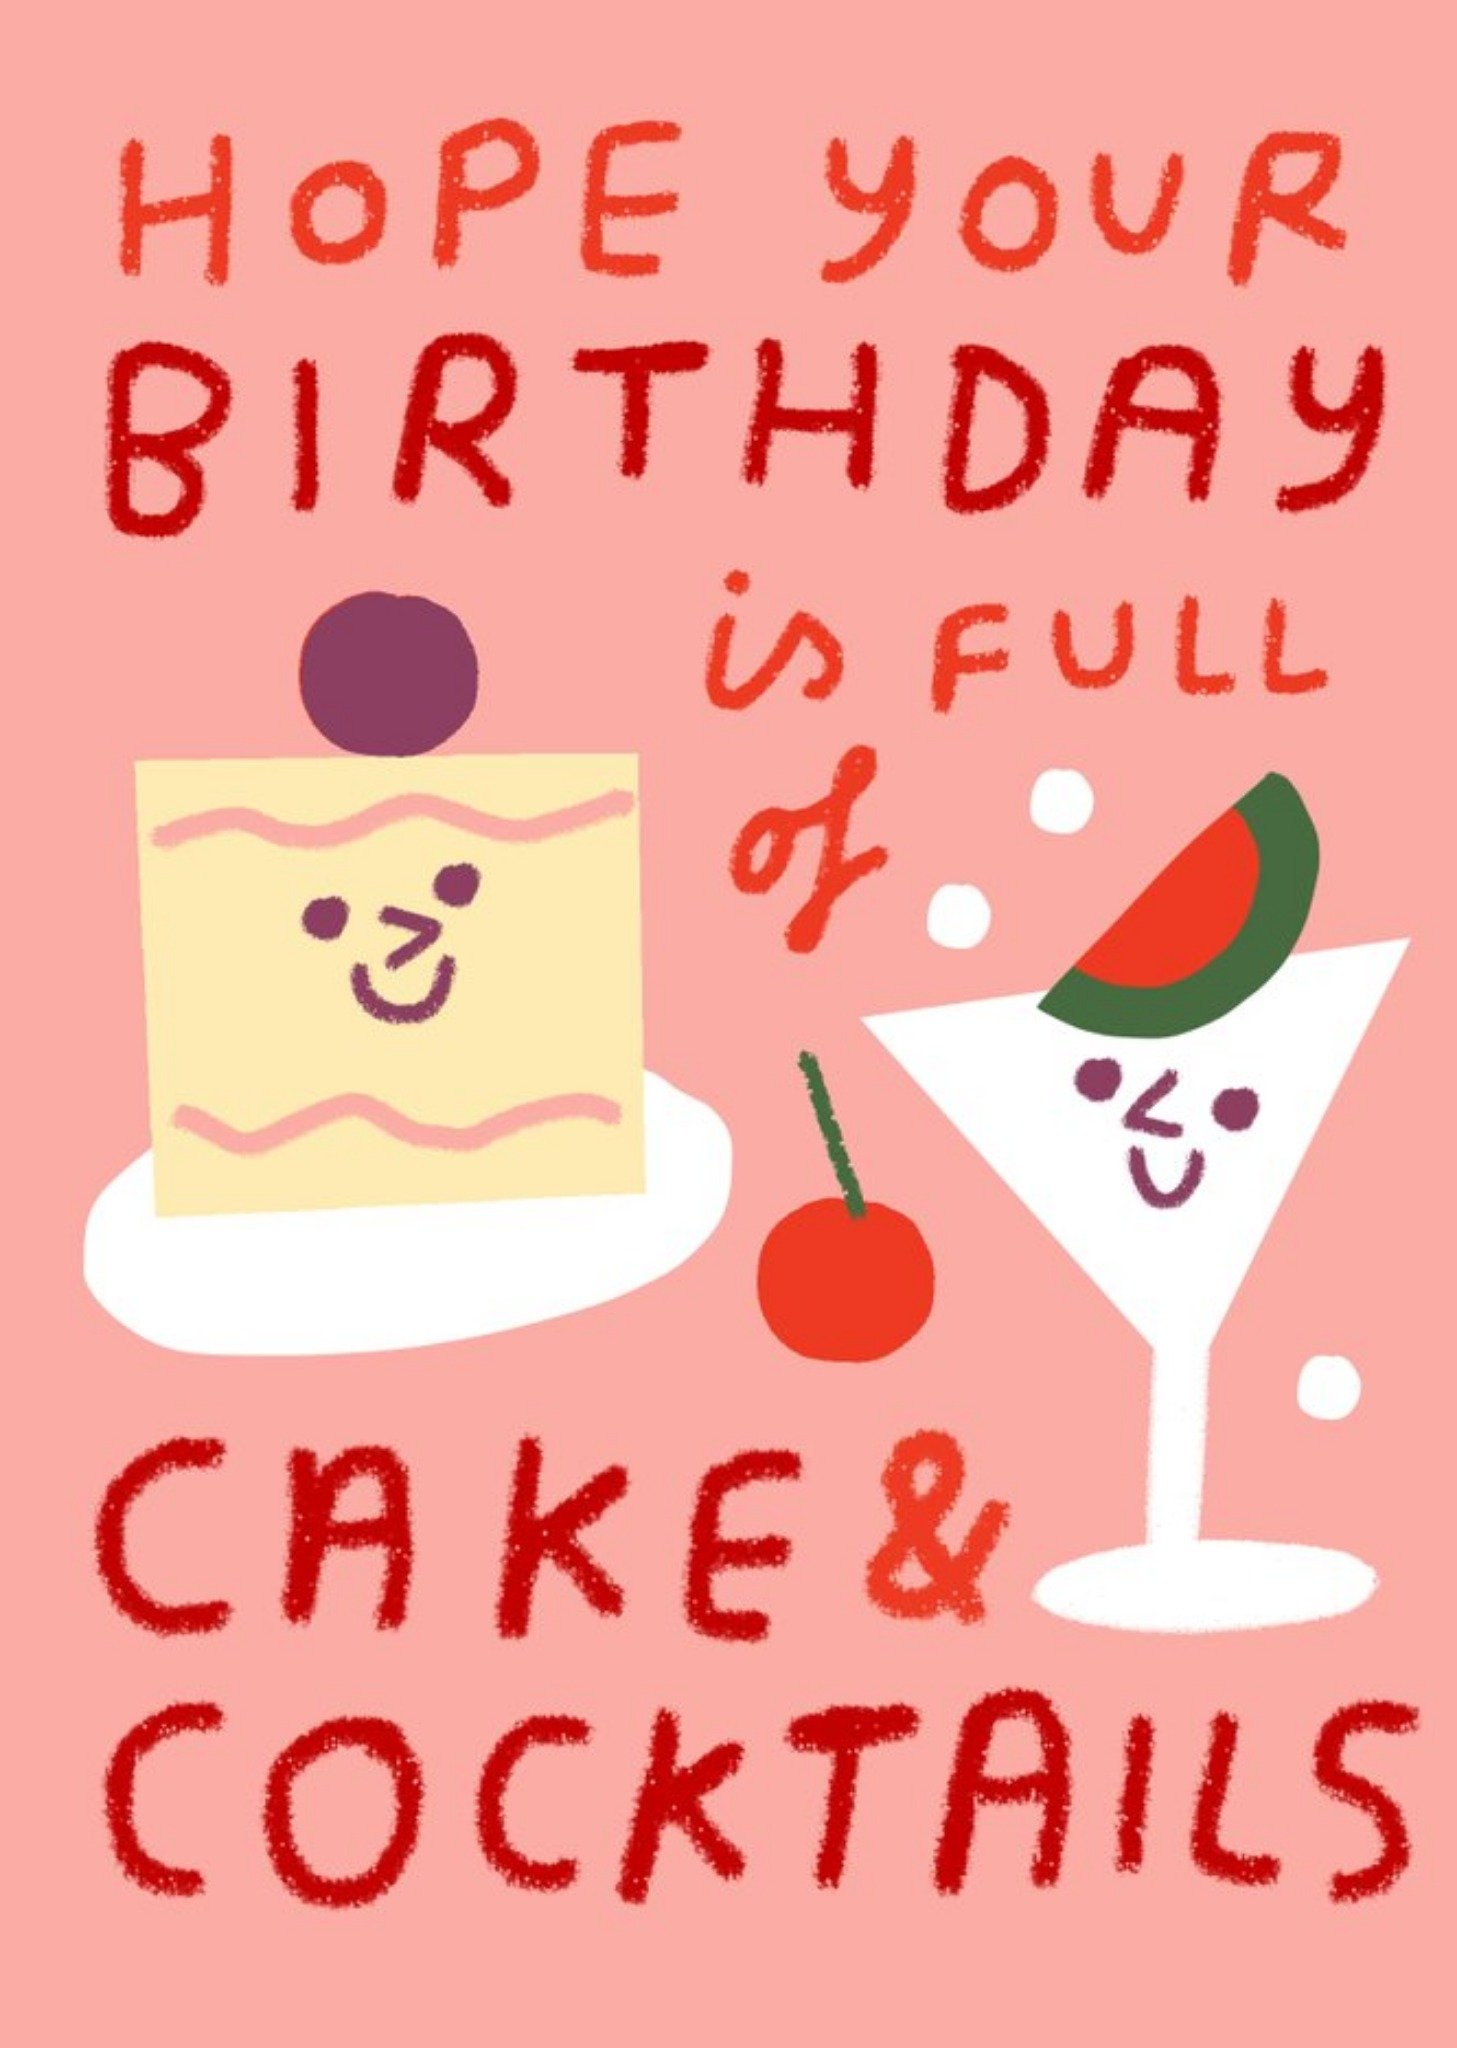 Moonpig Happy Birthday Card For Her - Cake And Cocktails, Large